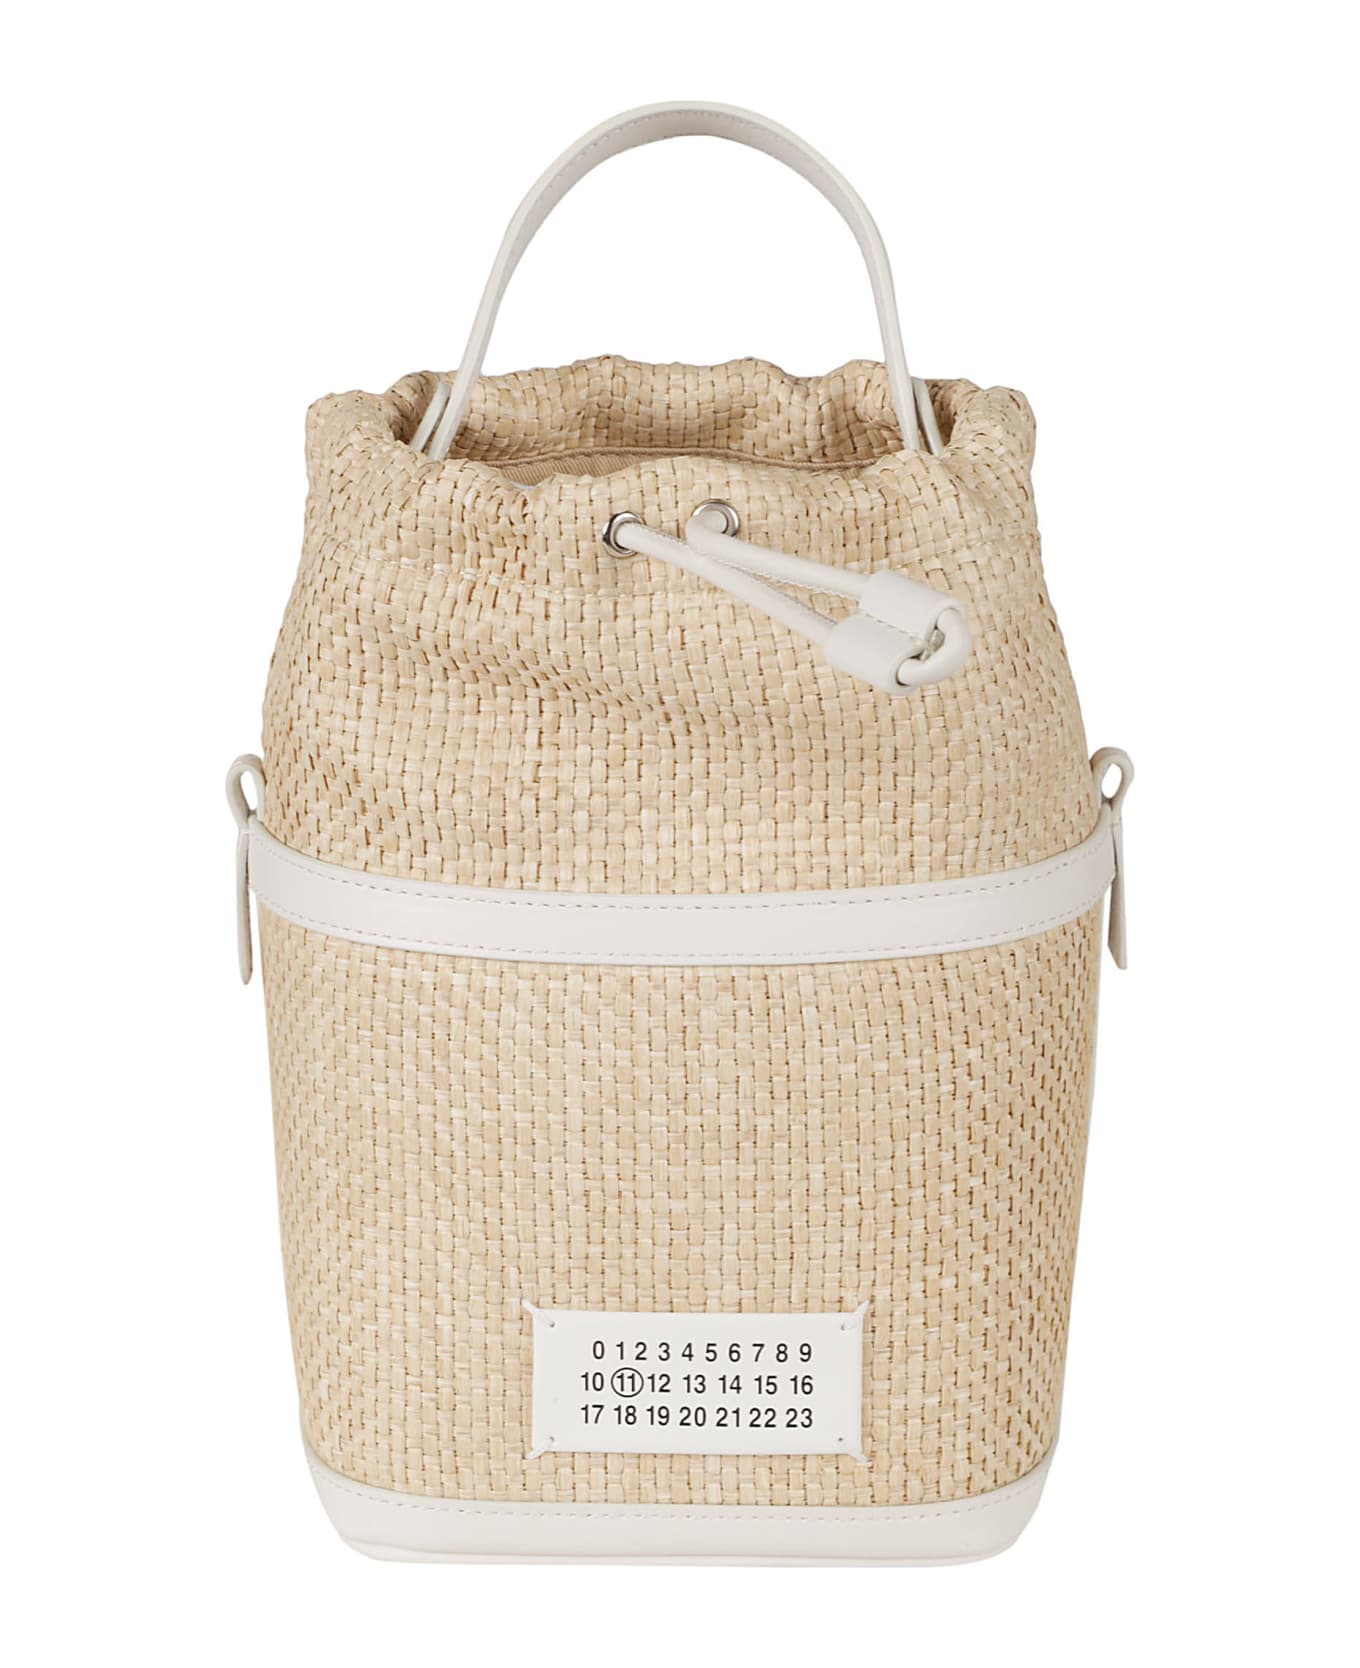 Maison Margiela Logo Patched Woven Bucket Bag - Natural/Dirty White トートバッグ